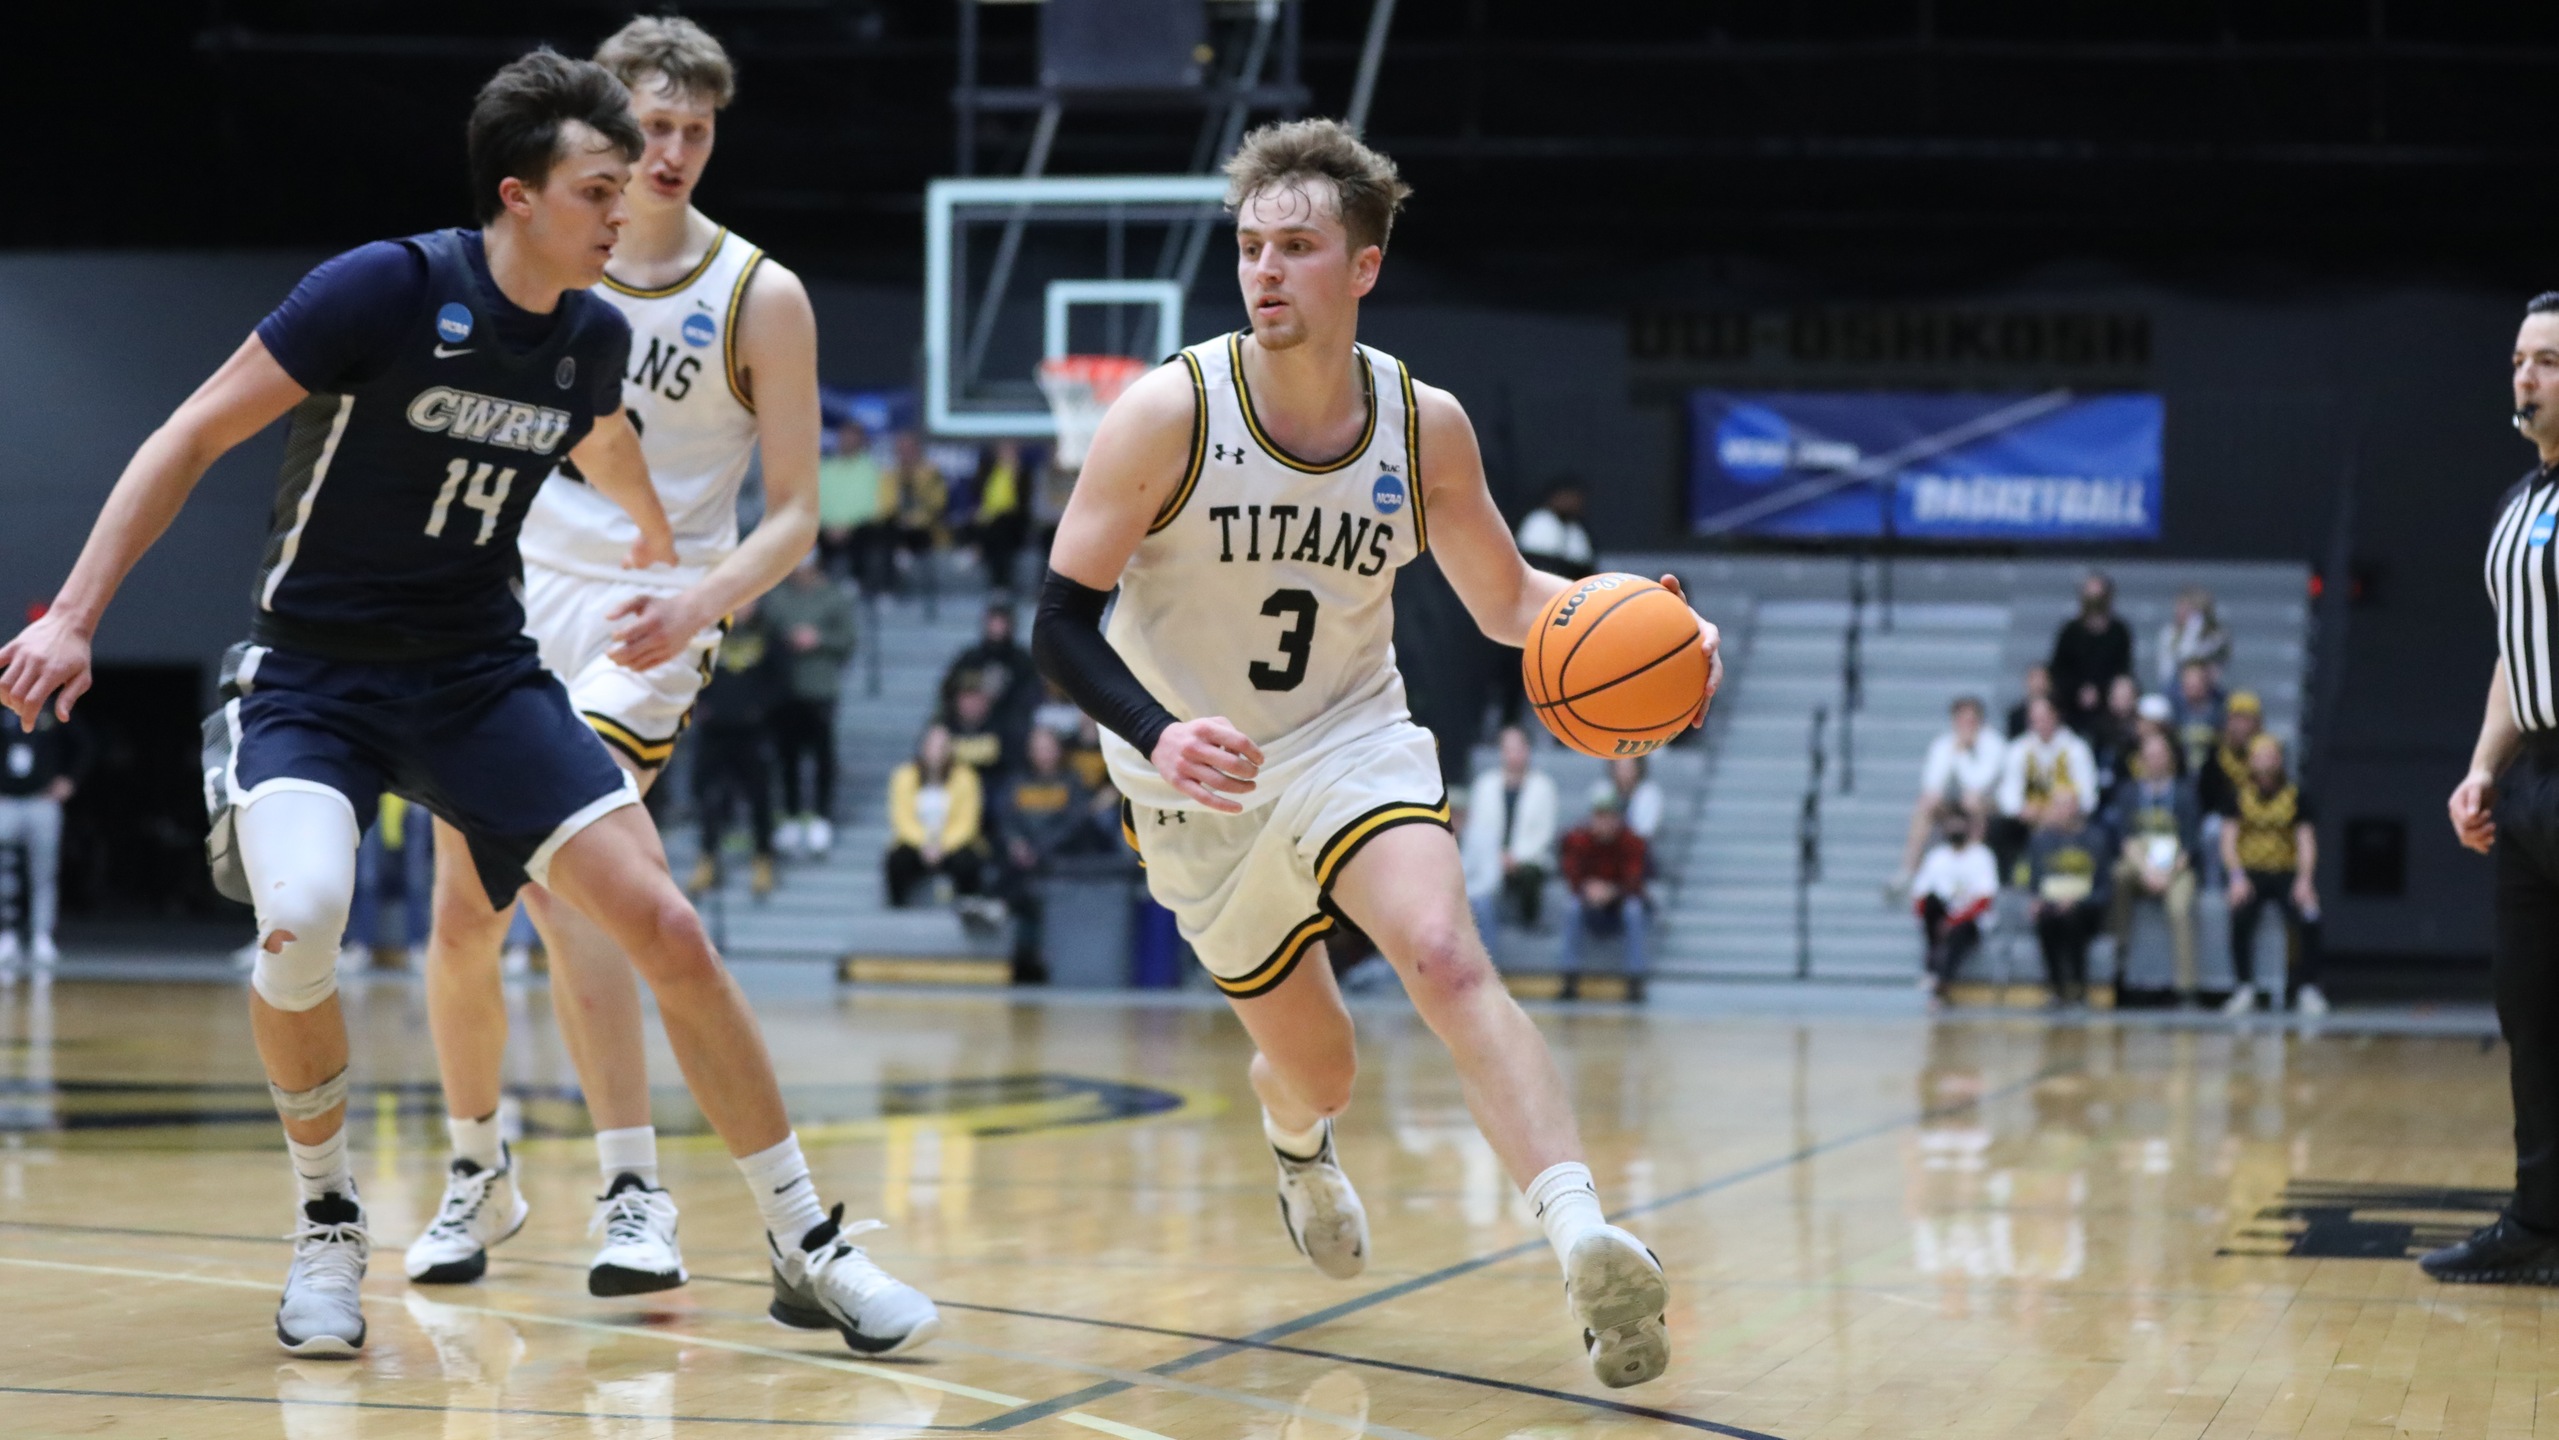 Muench poured in 21 points to pace the Titans against the Spartans.